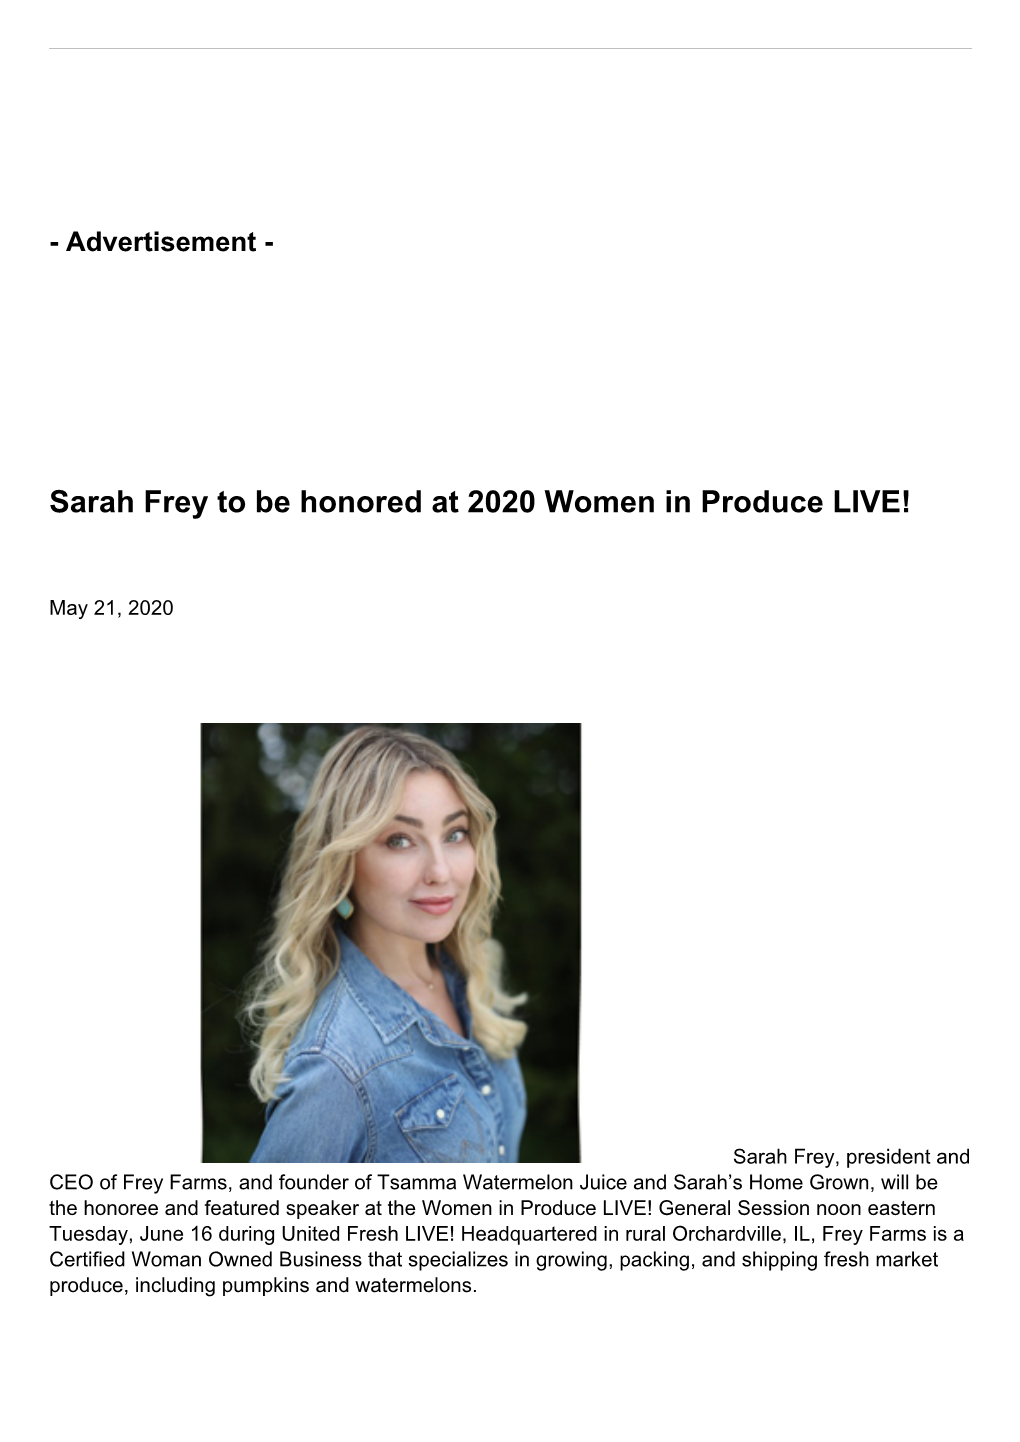 Sarah Frey to Be Honored at 2020 Women in Produce LIVE!